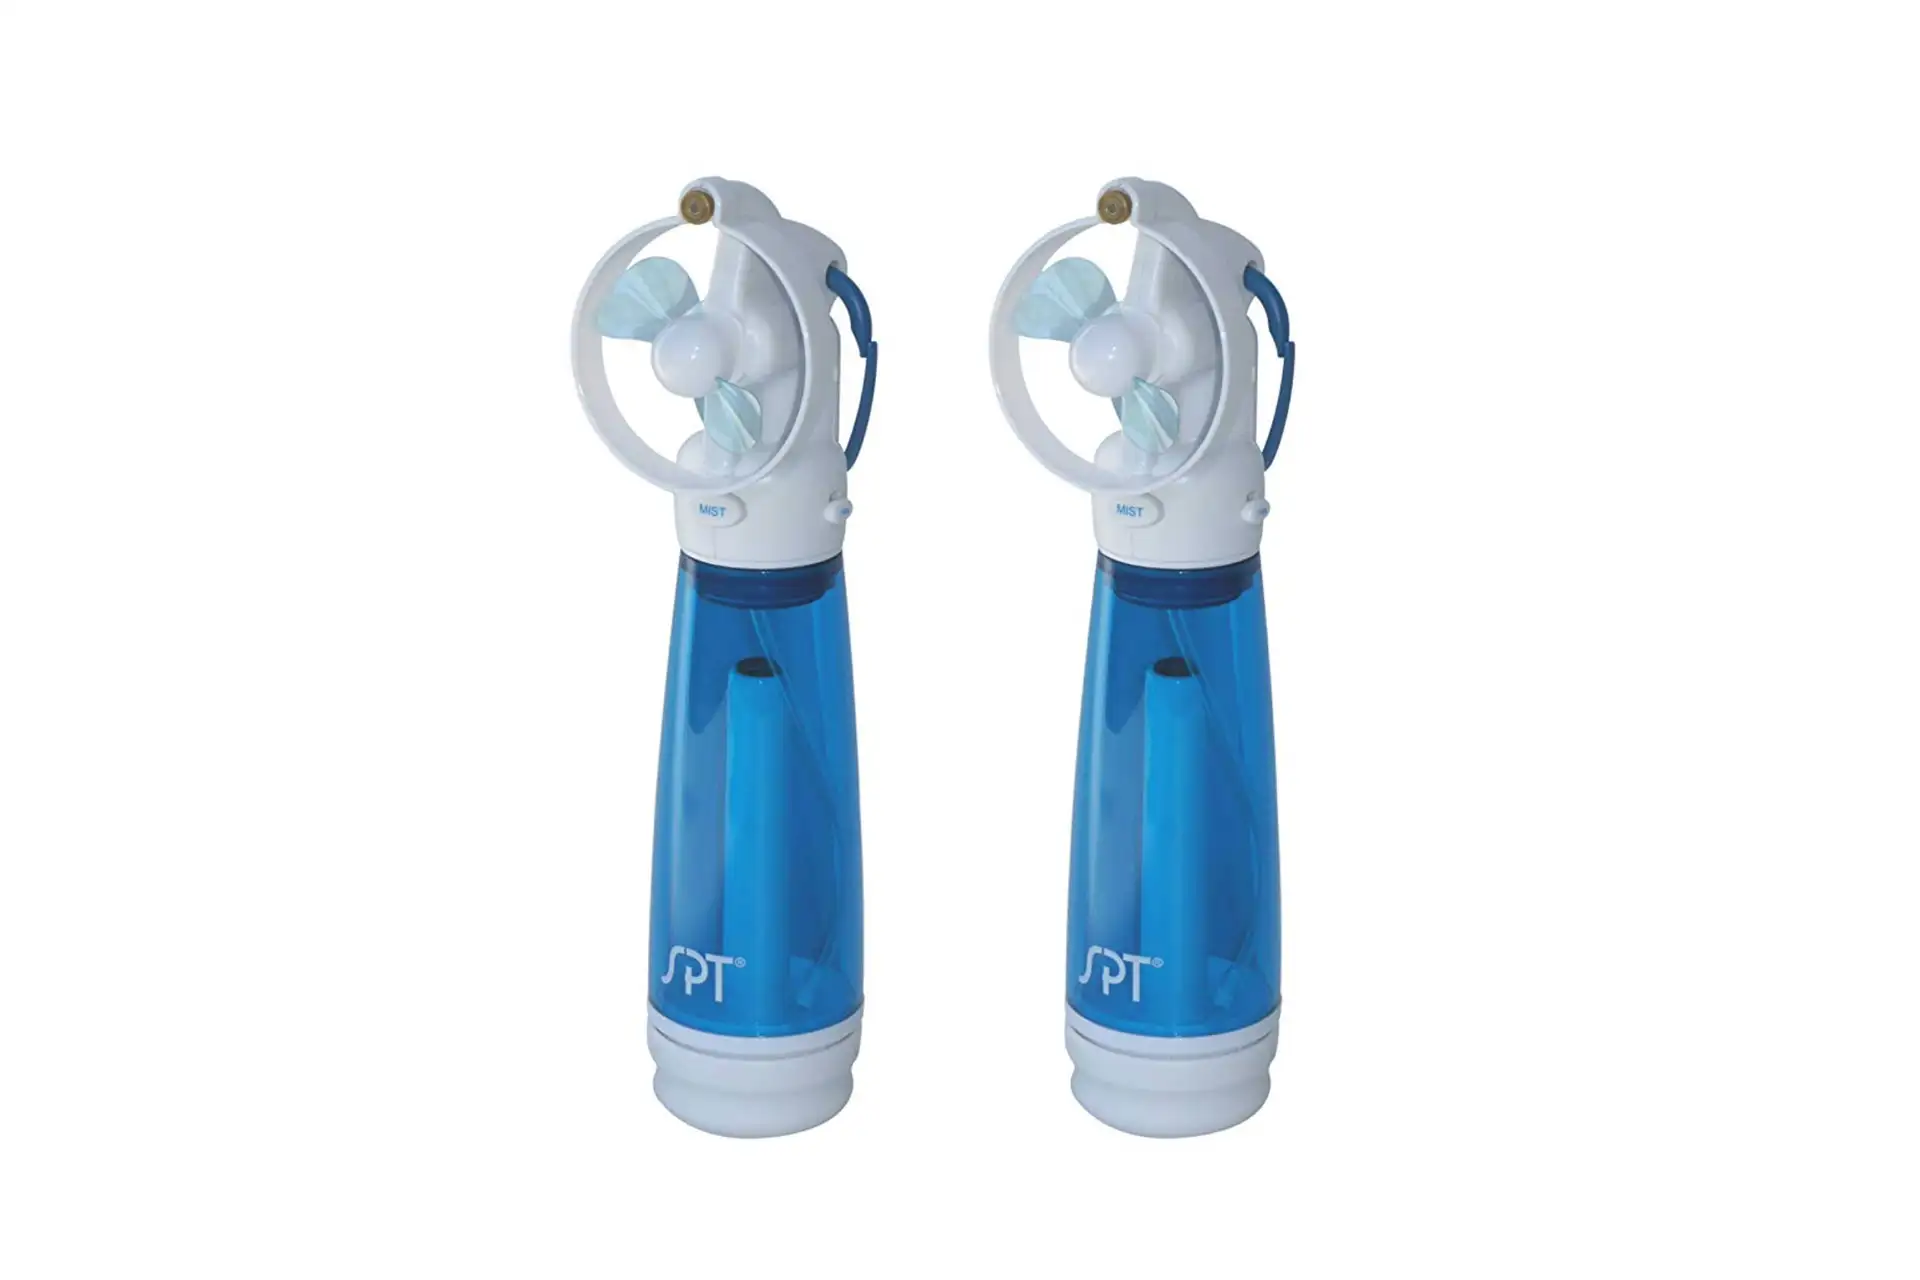 Personal Misting Fans; Courtesy of Amazon